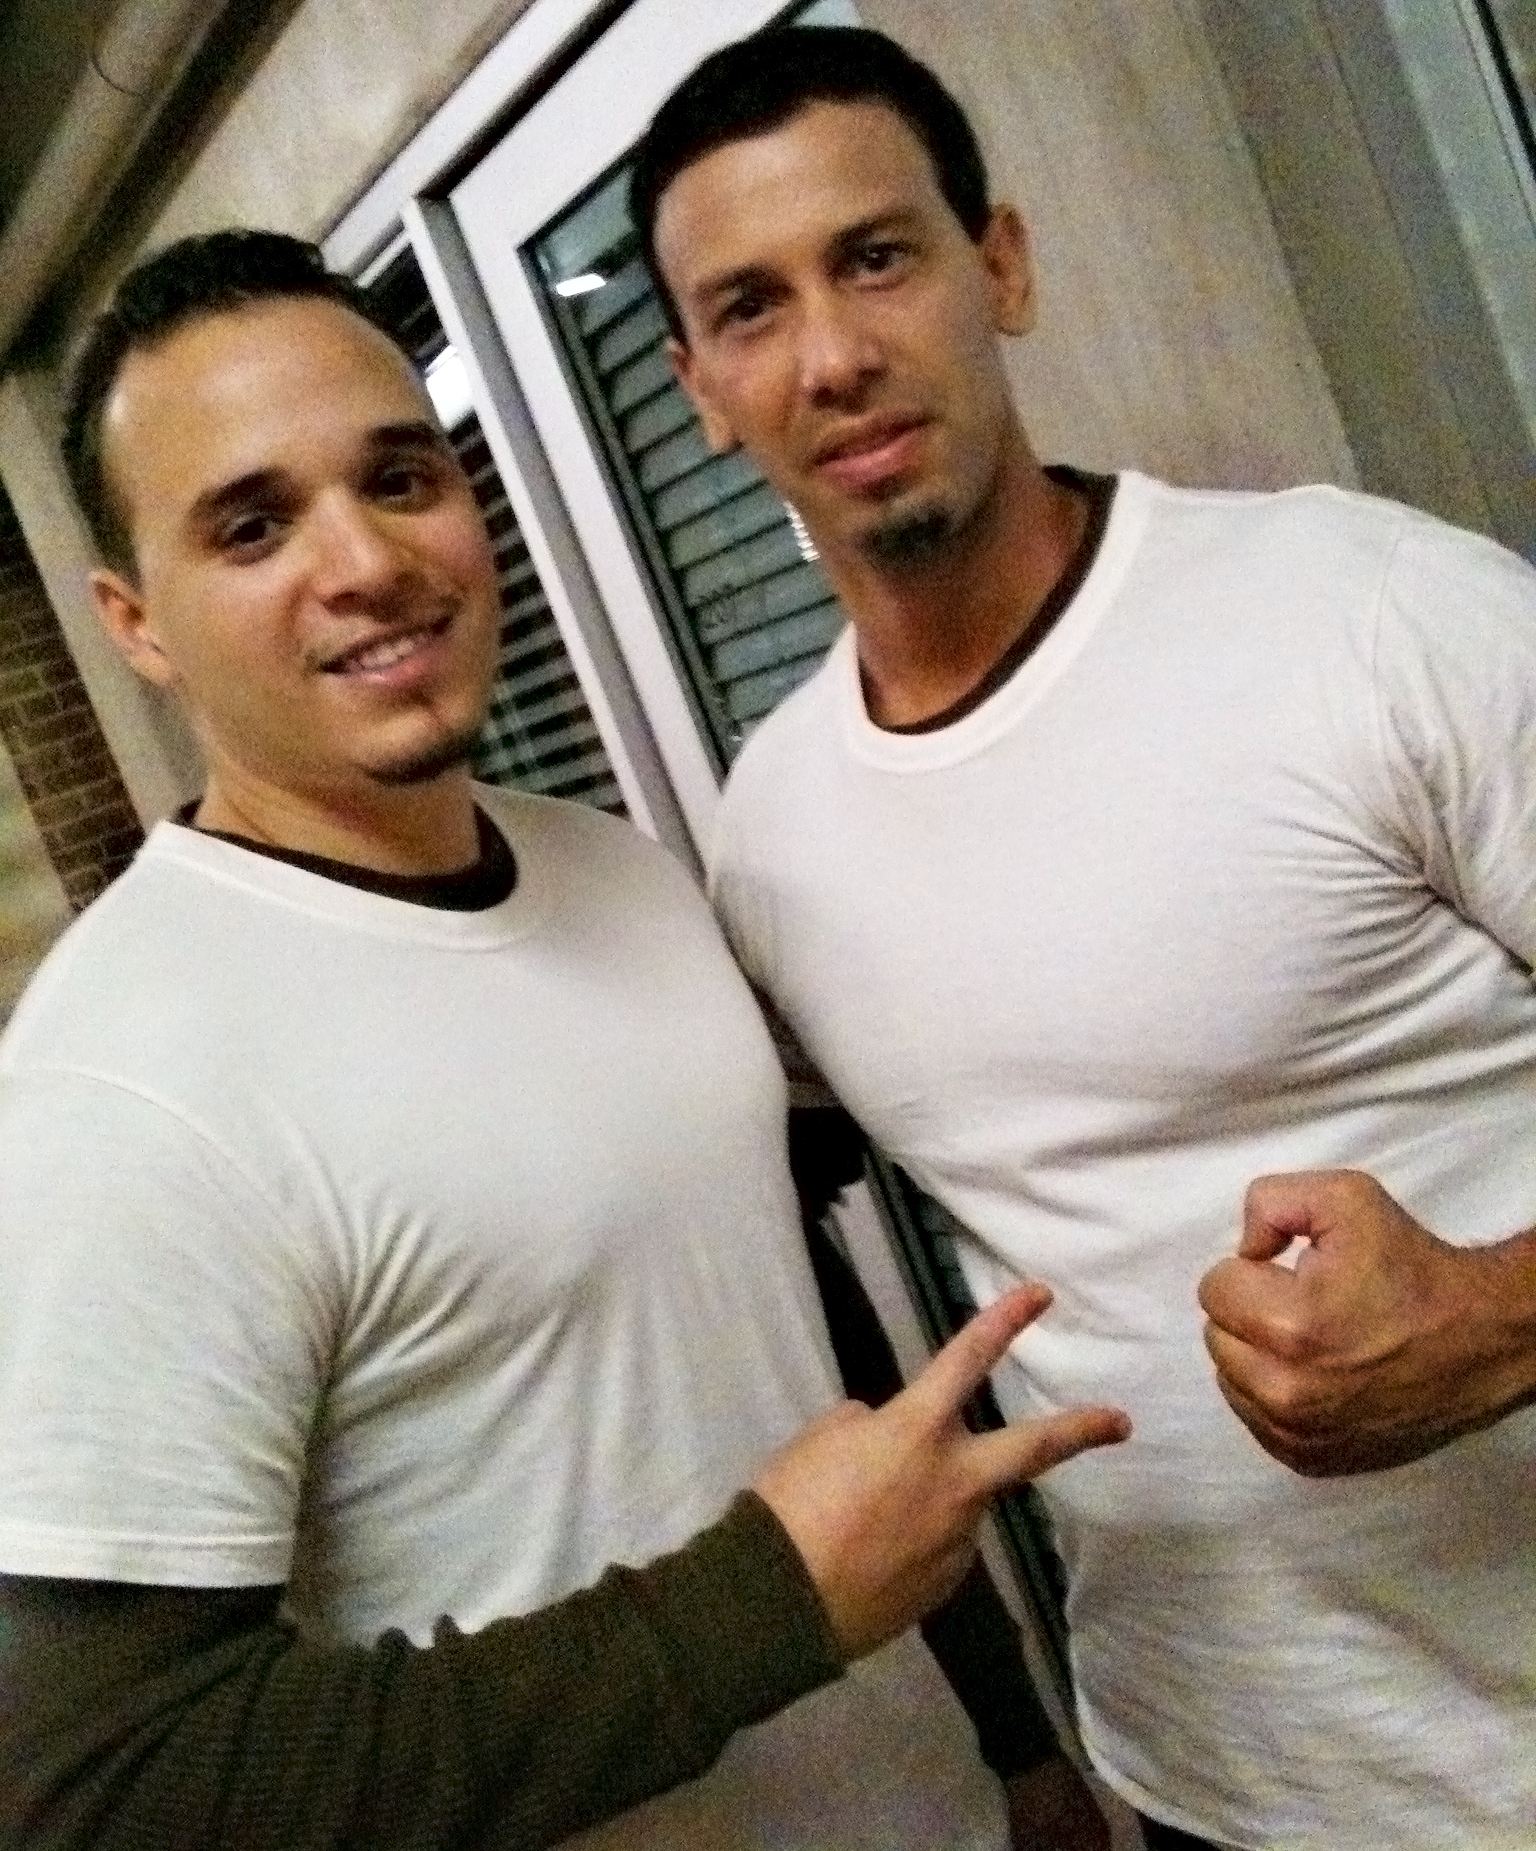 Bryan Lugo and Philip J Silvera, my stunt double on the set of The Mentalist